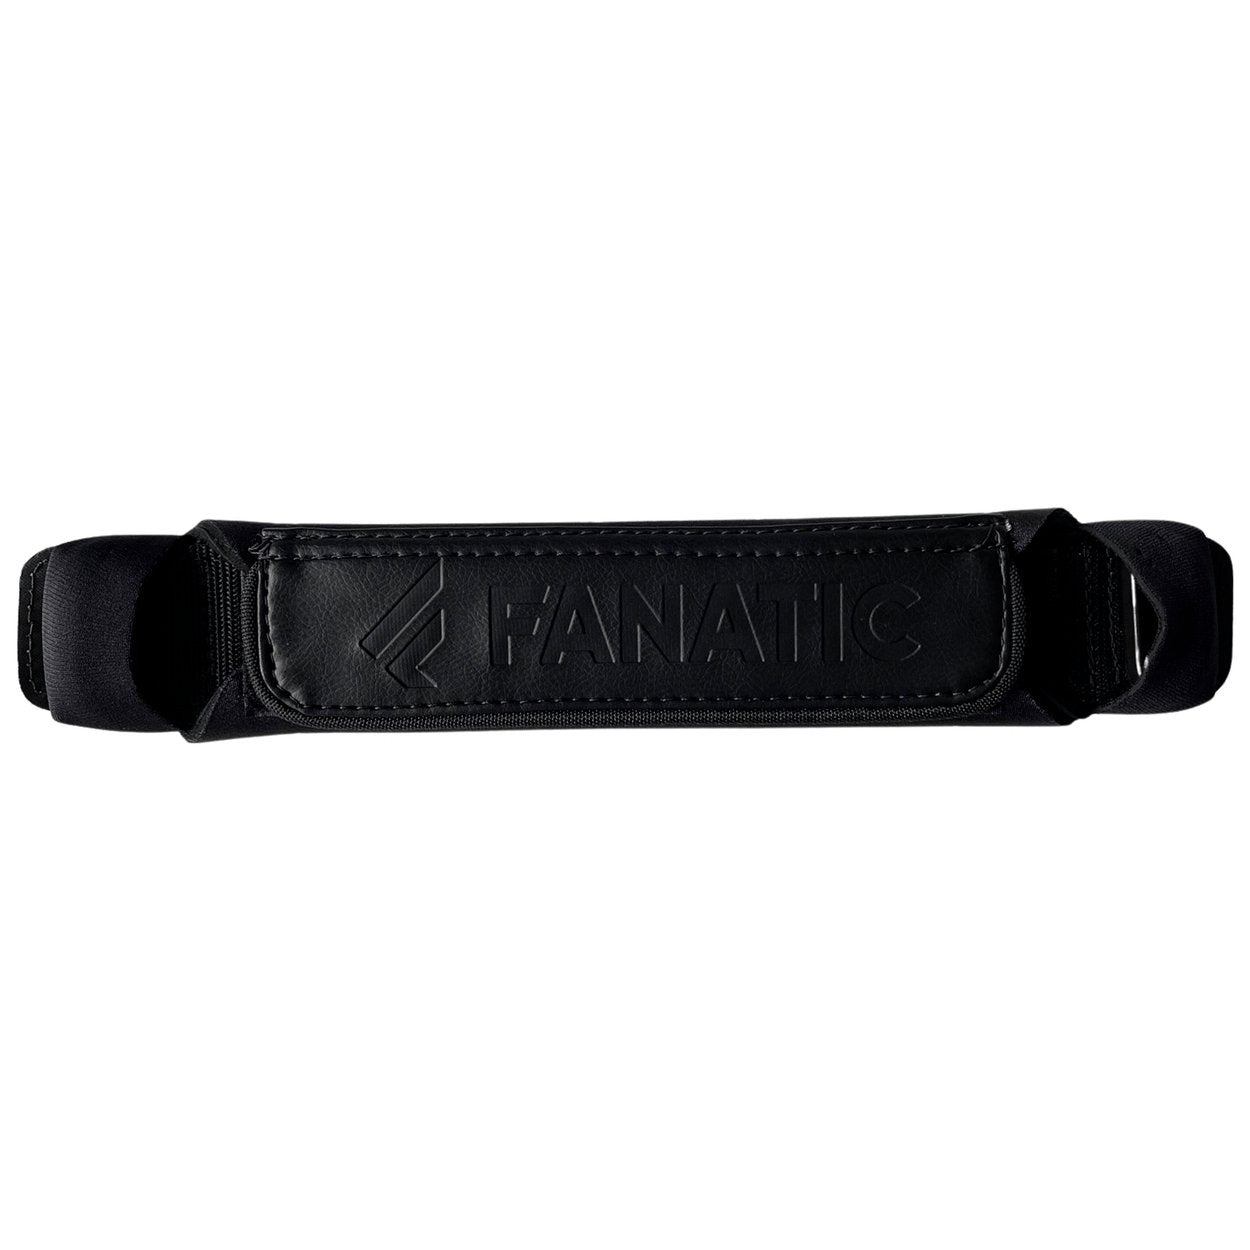 Fanatic Footstrap Premium SUP 2023 - Worthing Watersports - 9008415933990 - Spareparts - Fanatic SUP